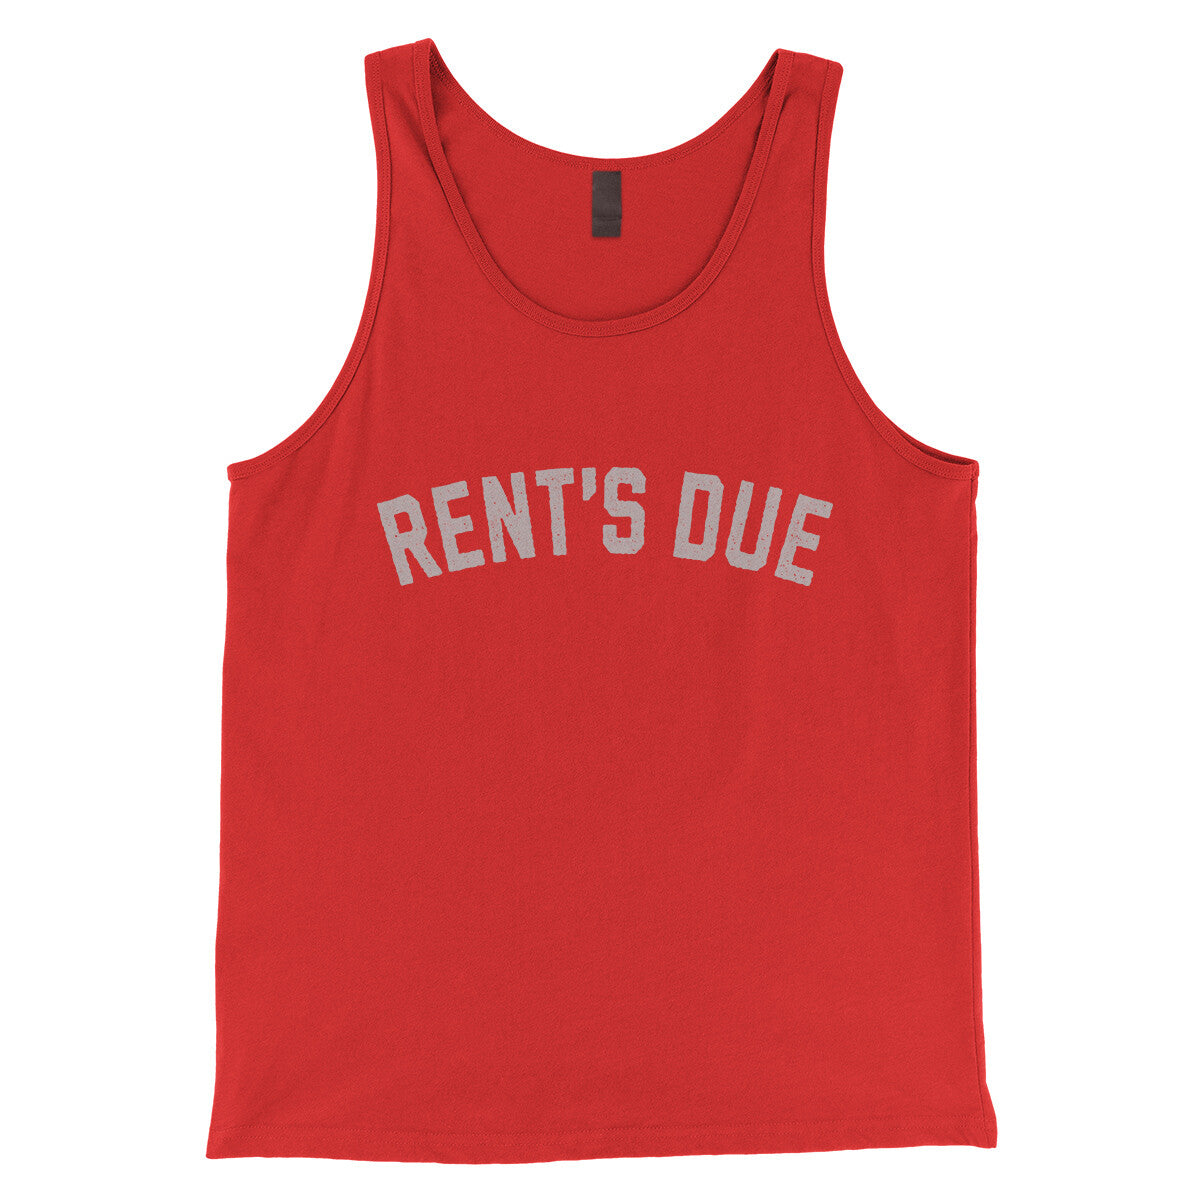 Rent's Due in Red Color